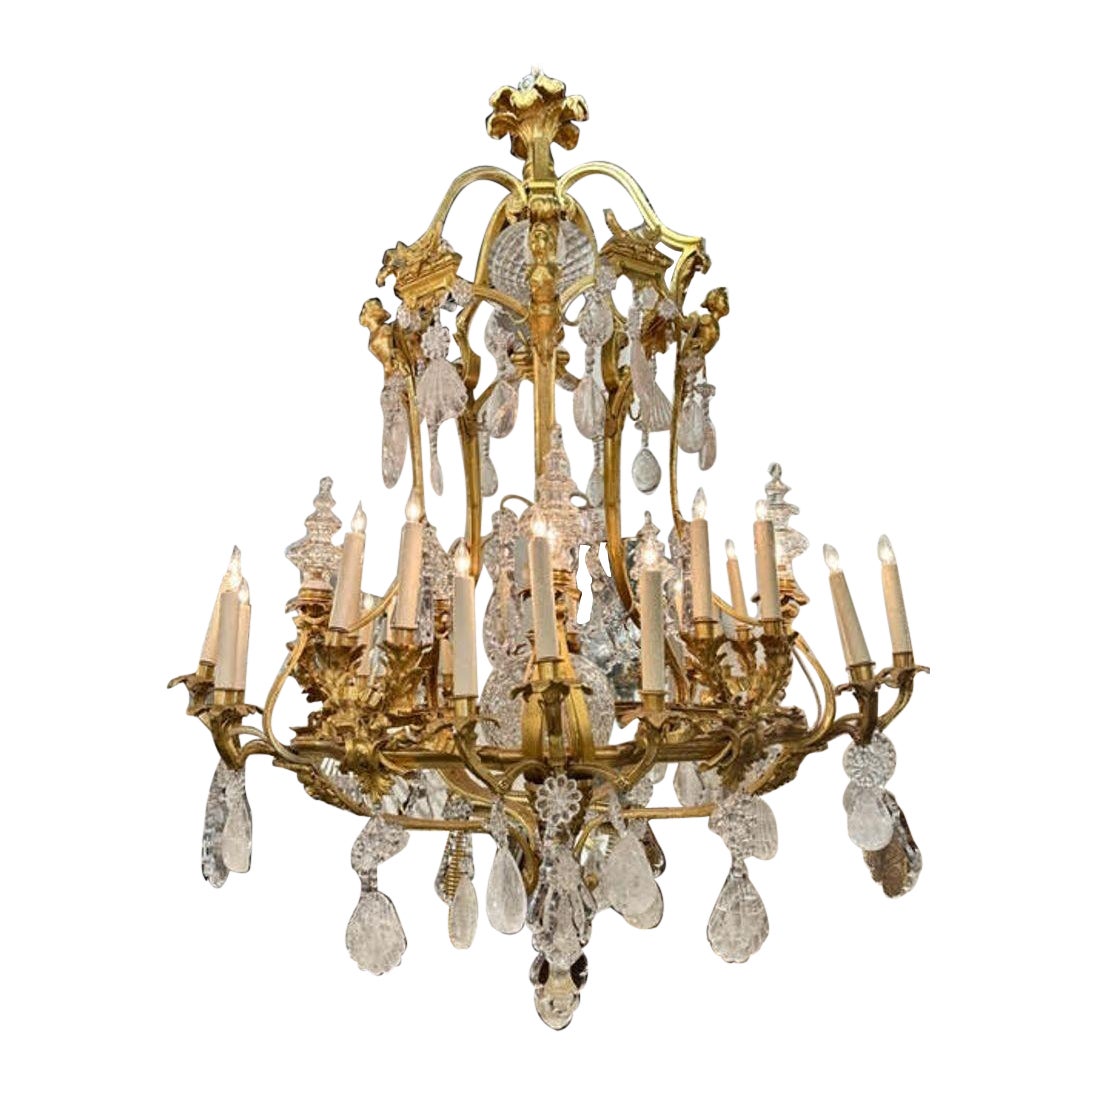 Large Scale 19th Century French Dore' and Rock Crystal Chandelier For Sale